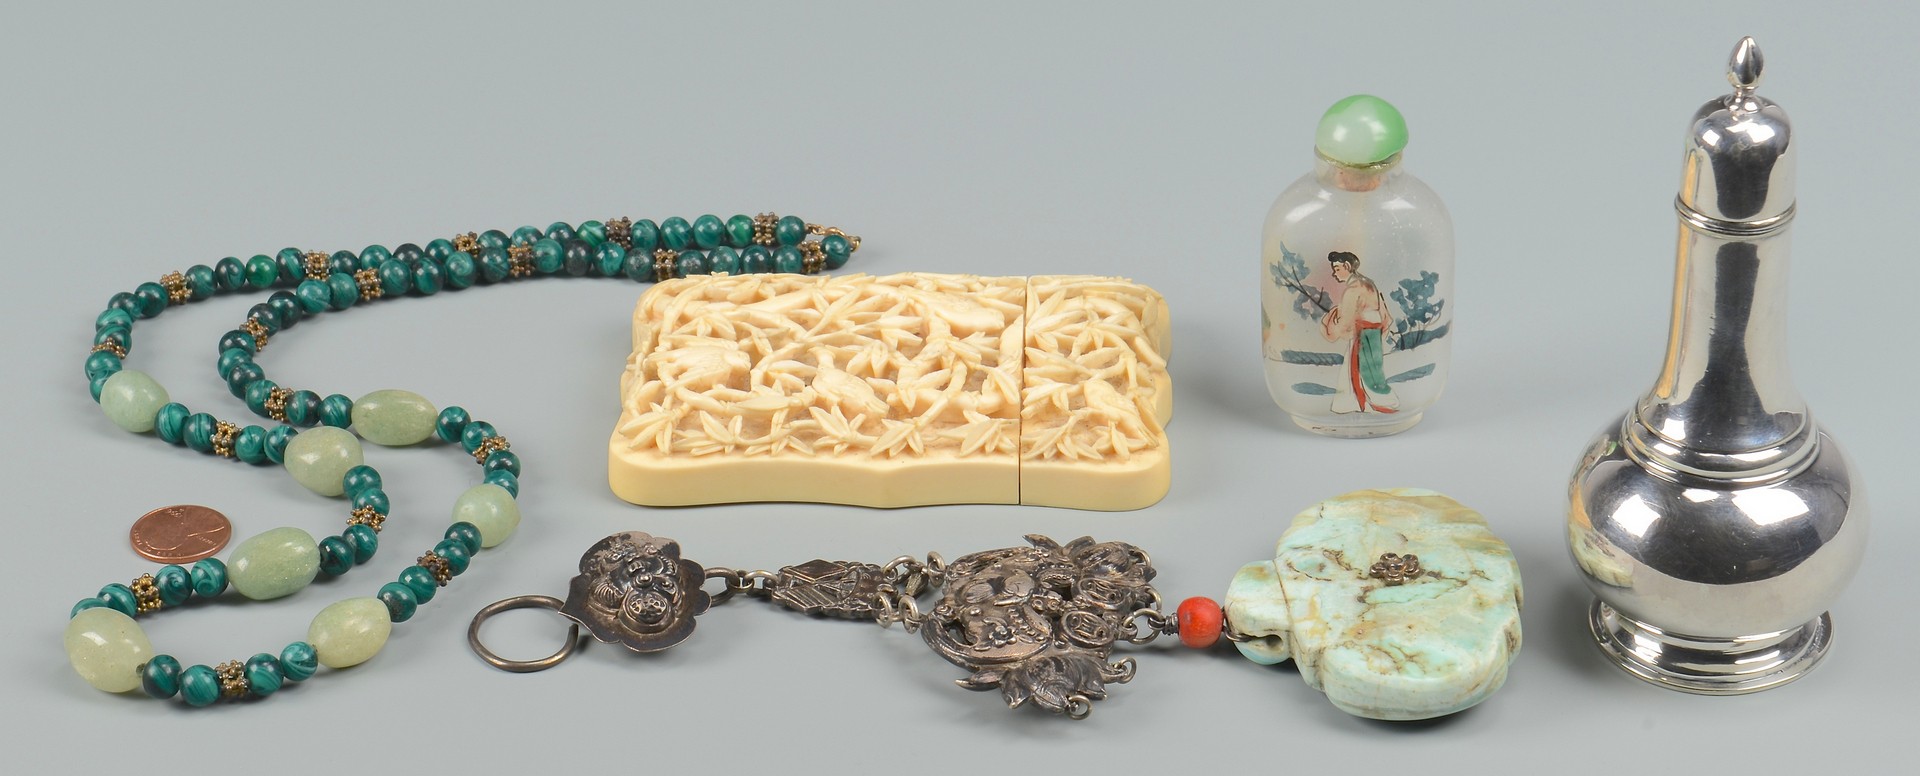 Lot 363: 5 Asian themed items, incl Ivory Case